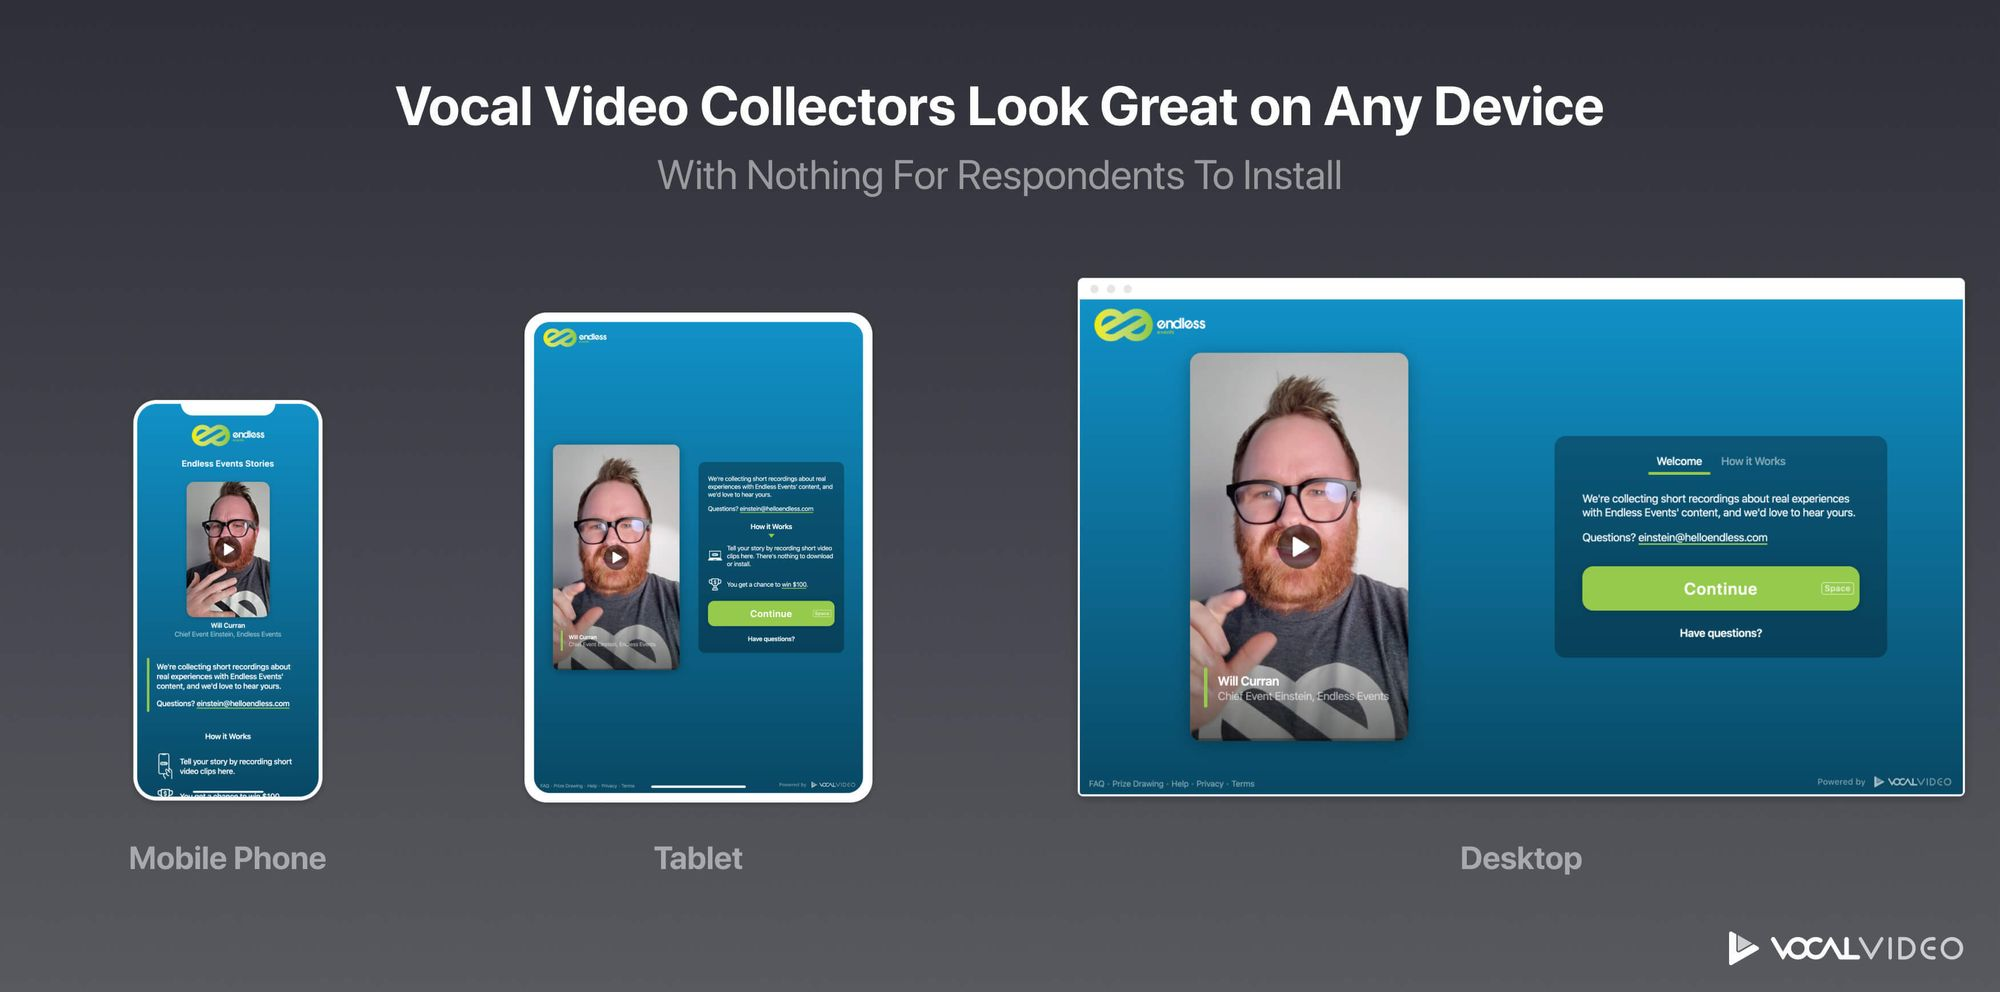 Vocal Video Collectors Look Great on Any Device: Mobile, Tablet, and Desktop